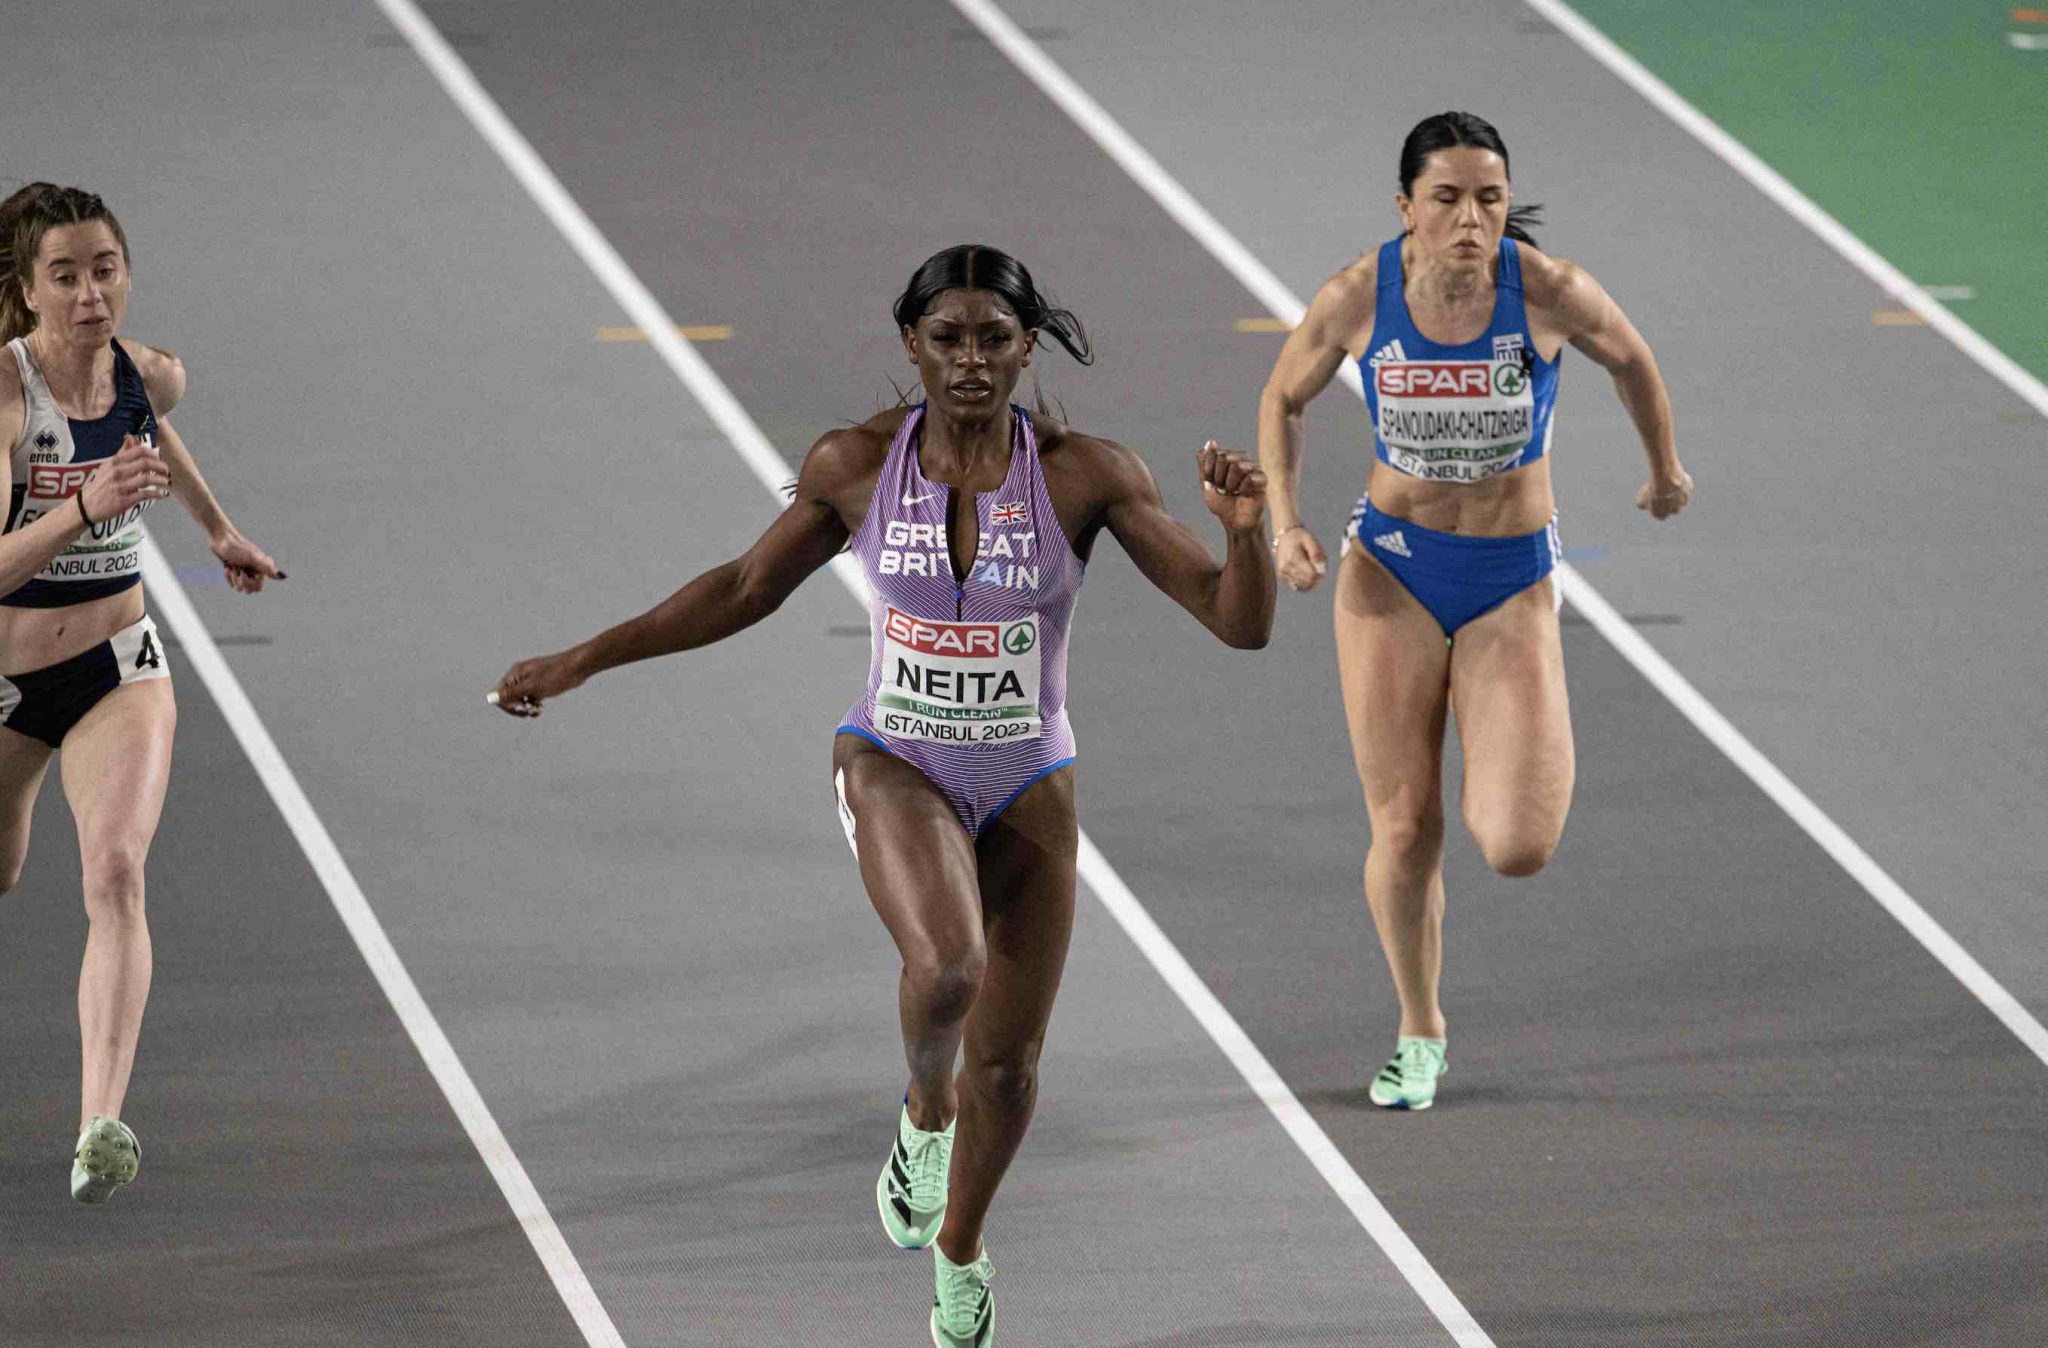 2023 European Athletics Indoor Champs, The Women's 60m, who will win